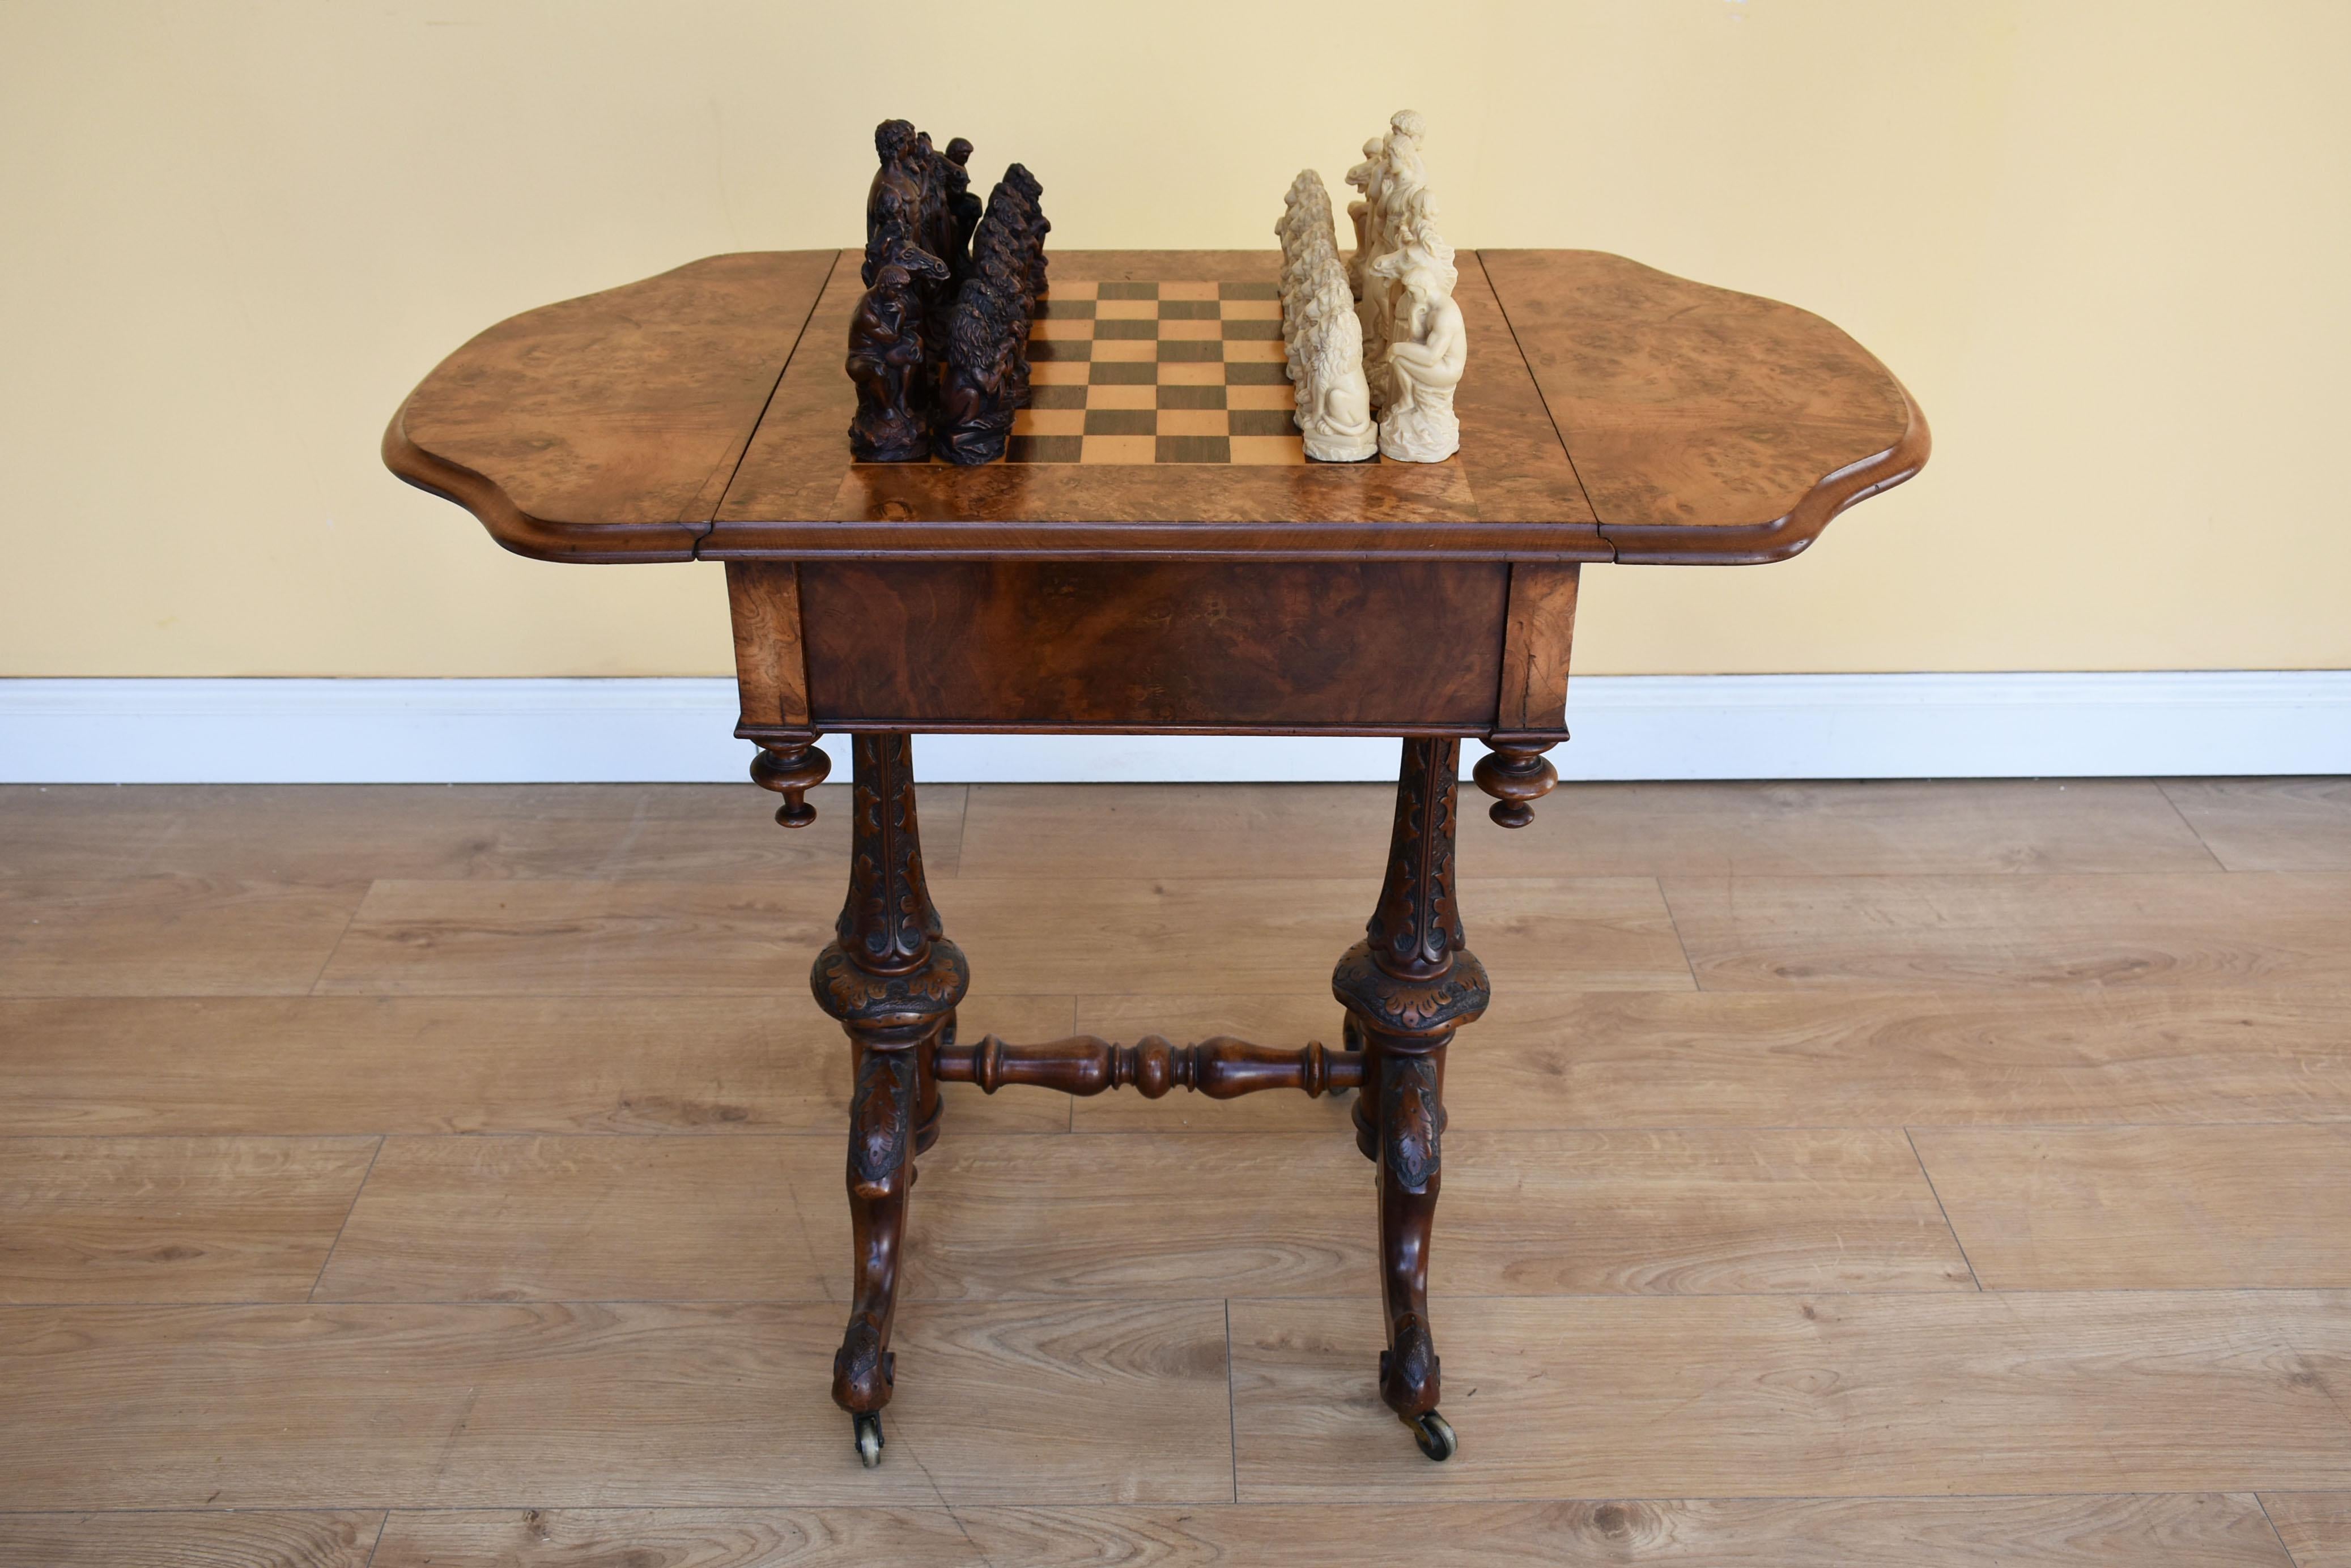 For sale is a good quality Victorian burr walnut games table, with an inlaid chess top with shaped drop leaves and a frieze drawer, raised on bulbous carved standard ends. This piece is in excellent, original condition and comes complete with chess